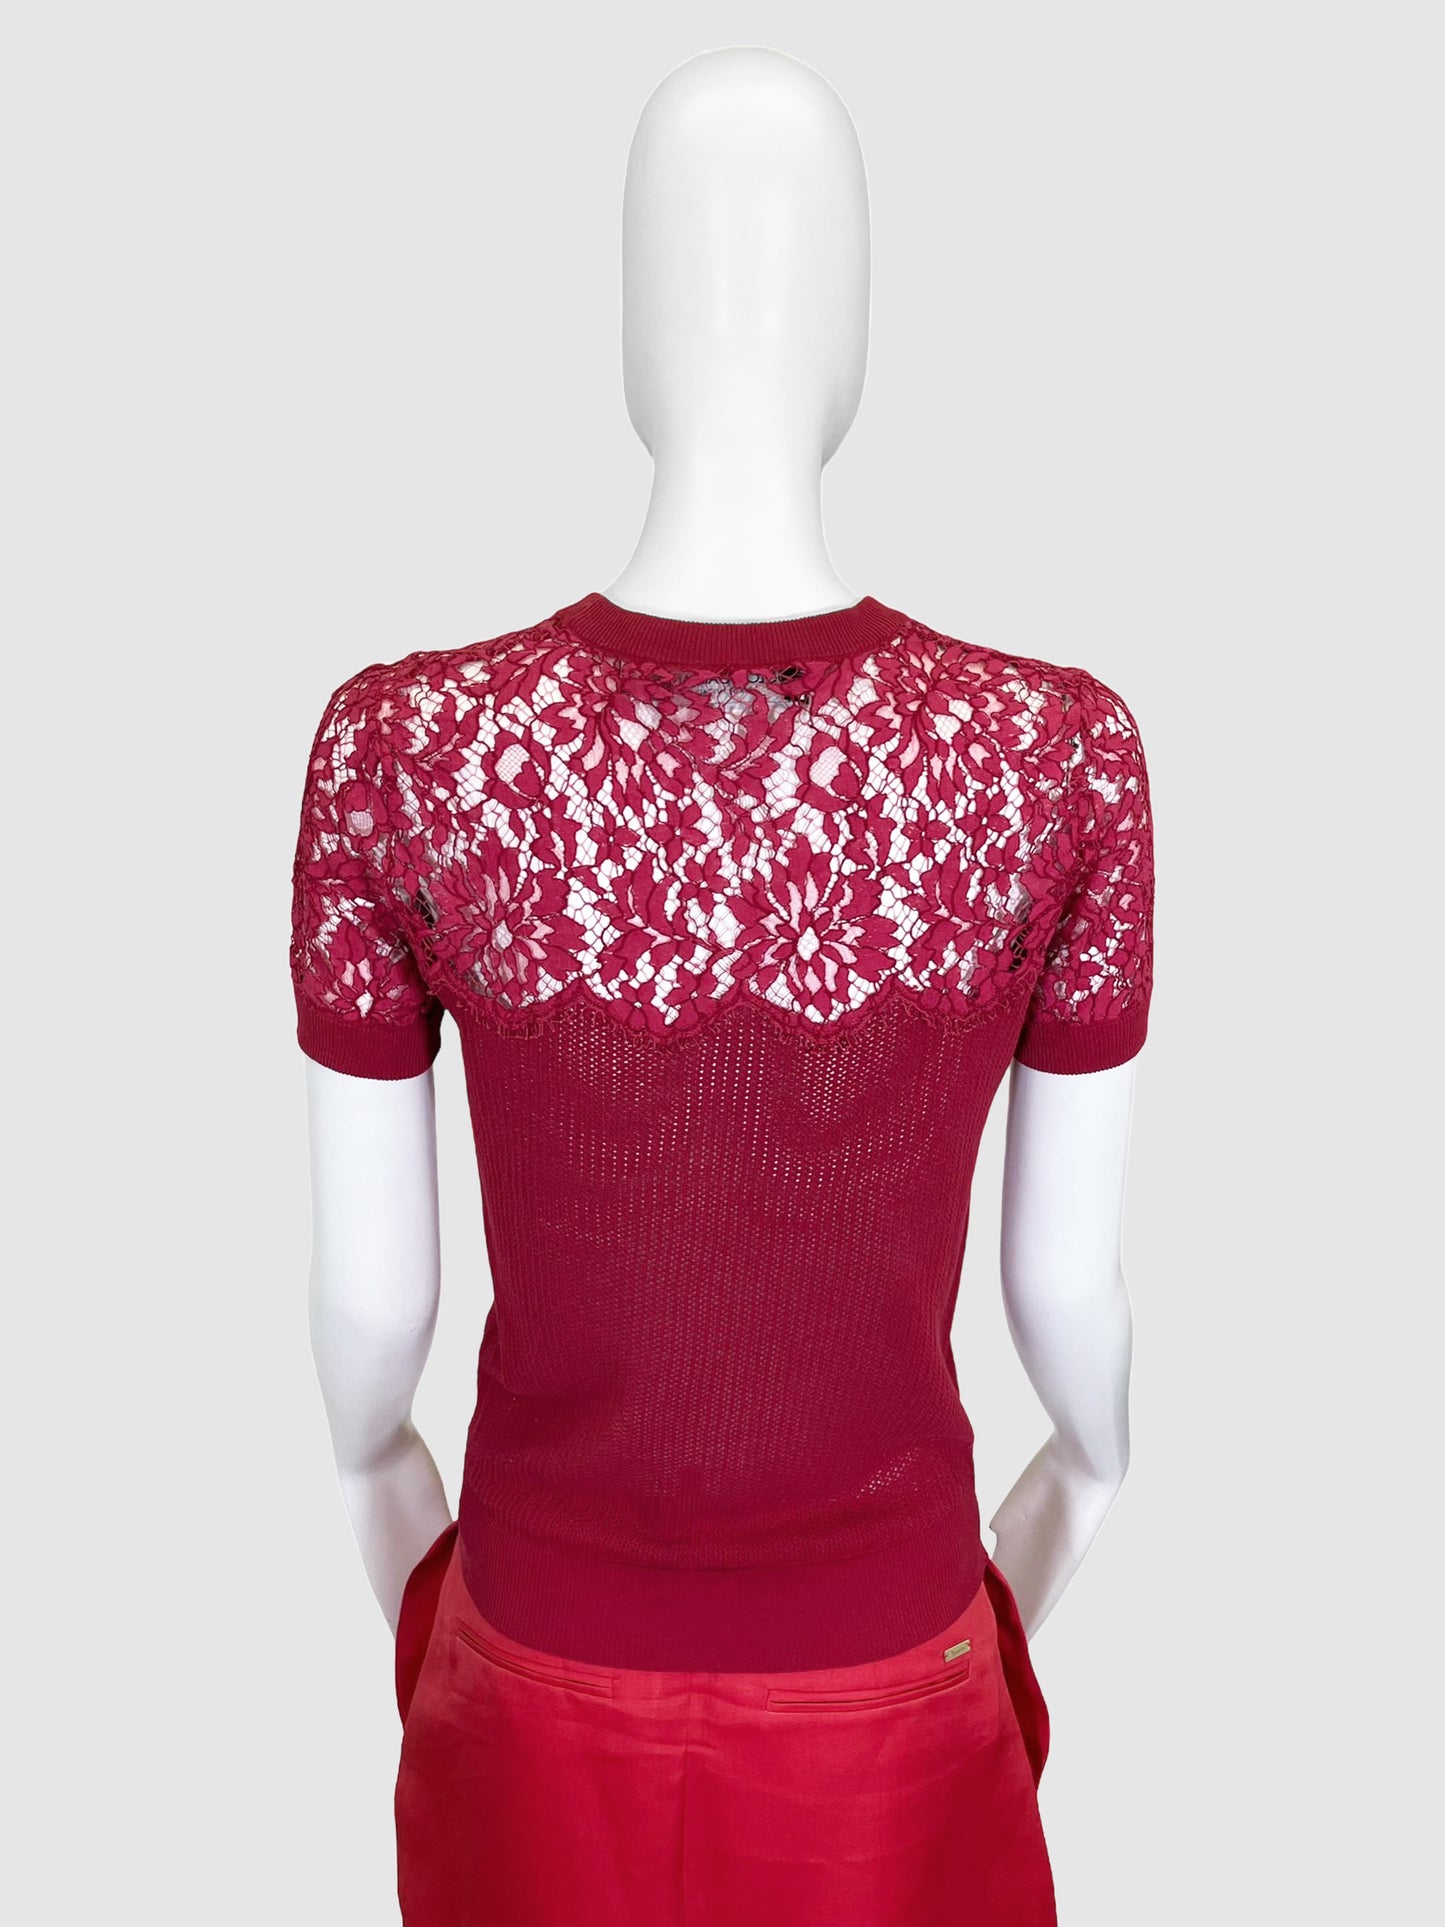 Dolce & Gabbana Knit Stretchy Tee with Lace - Size 38